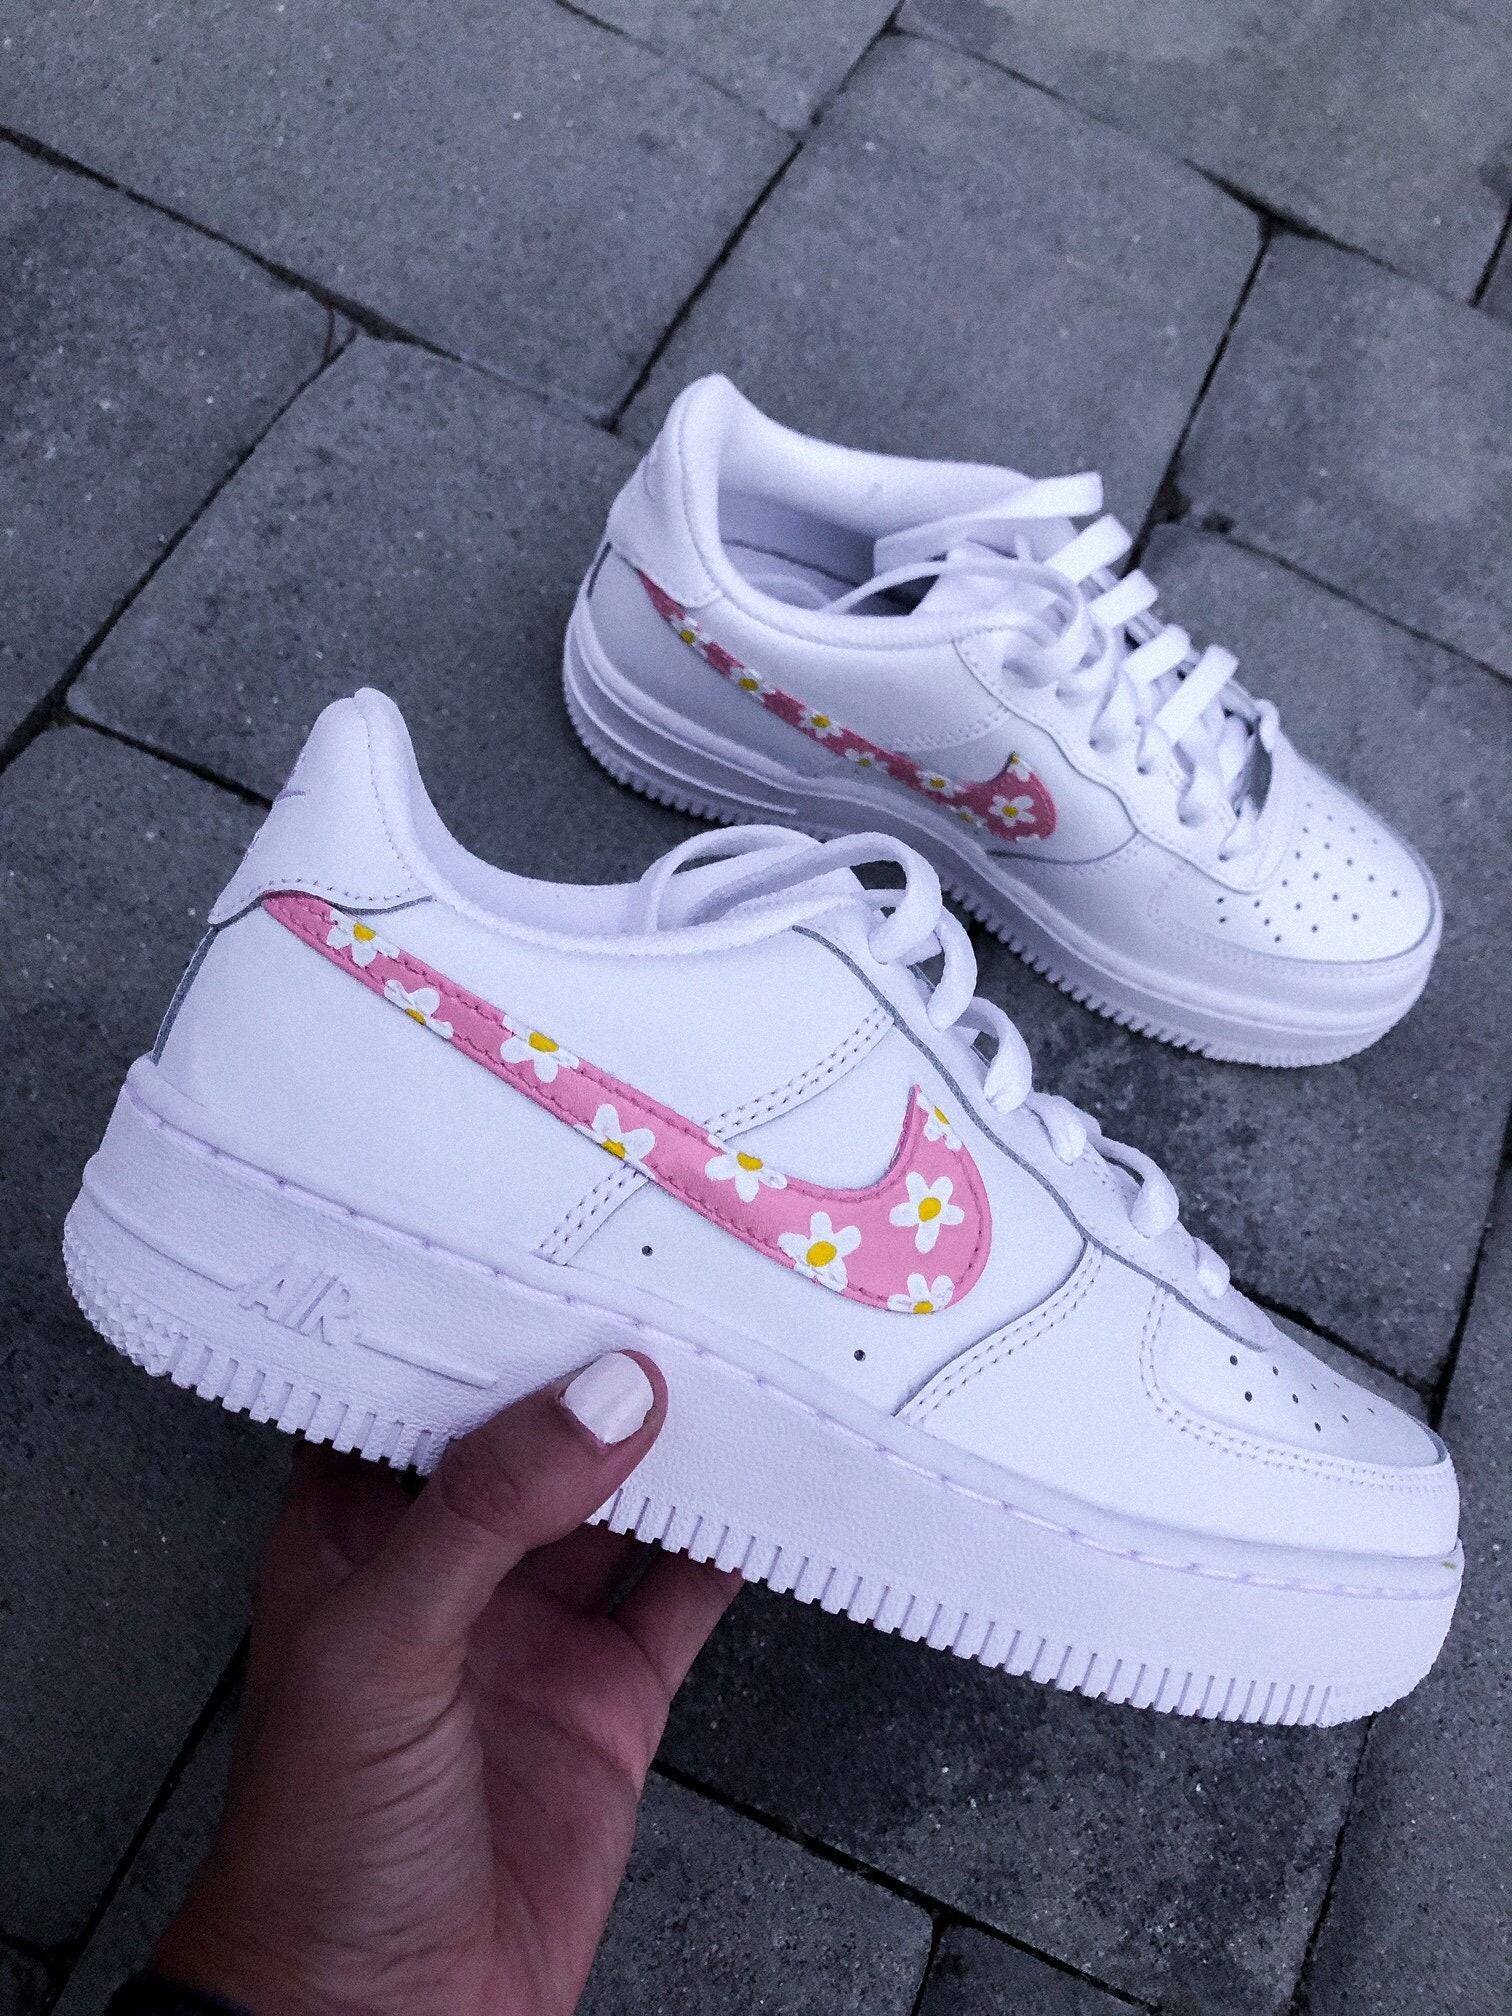 Louis Vuitton's Men's Spring '22 Collection Features Nike Air Force 1